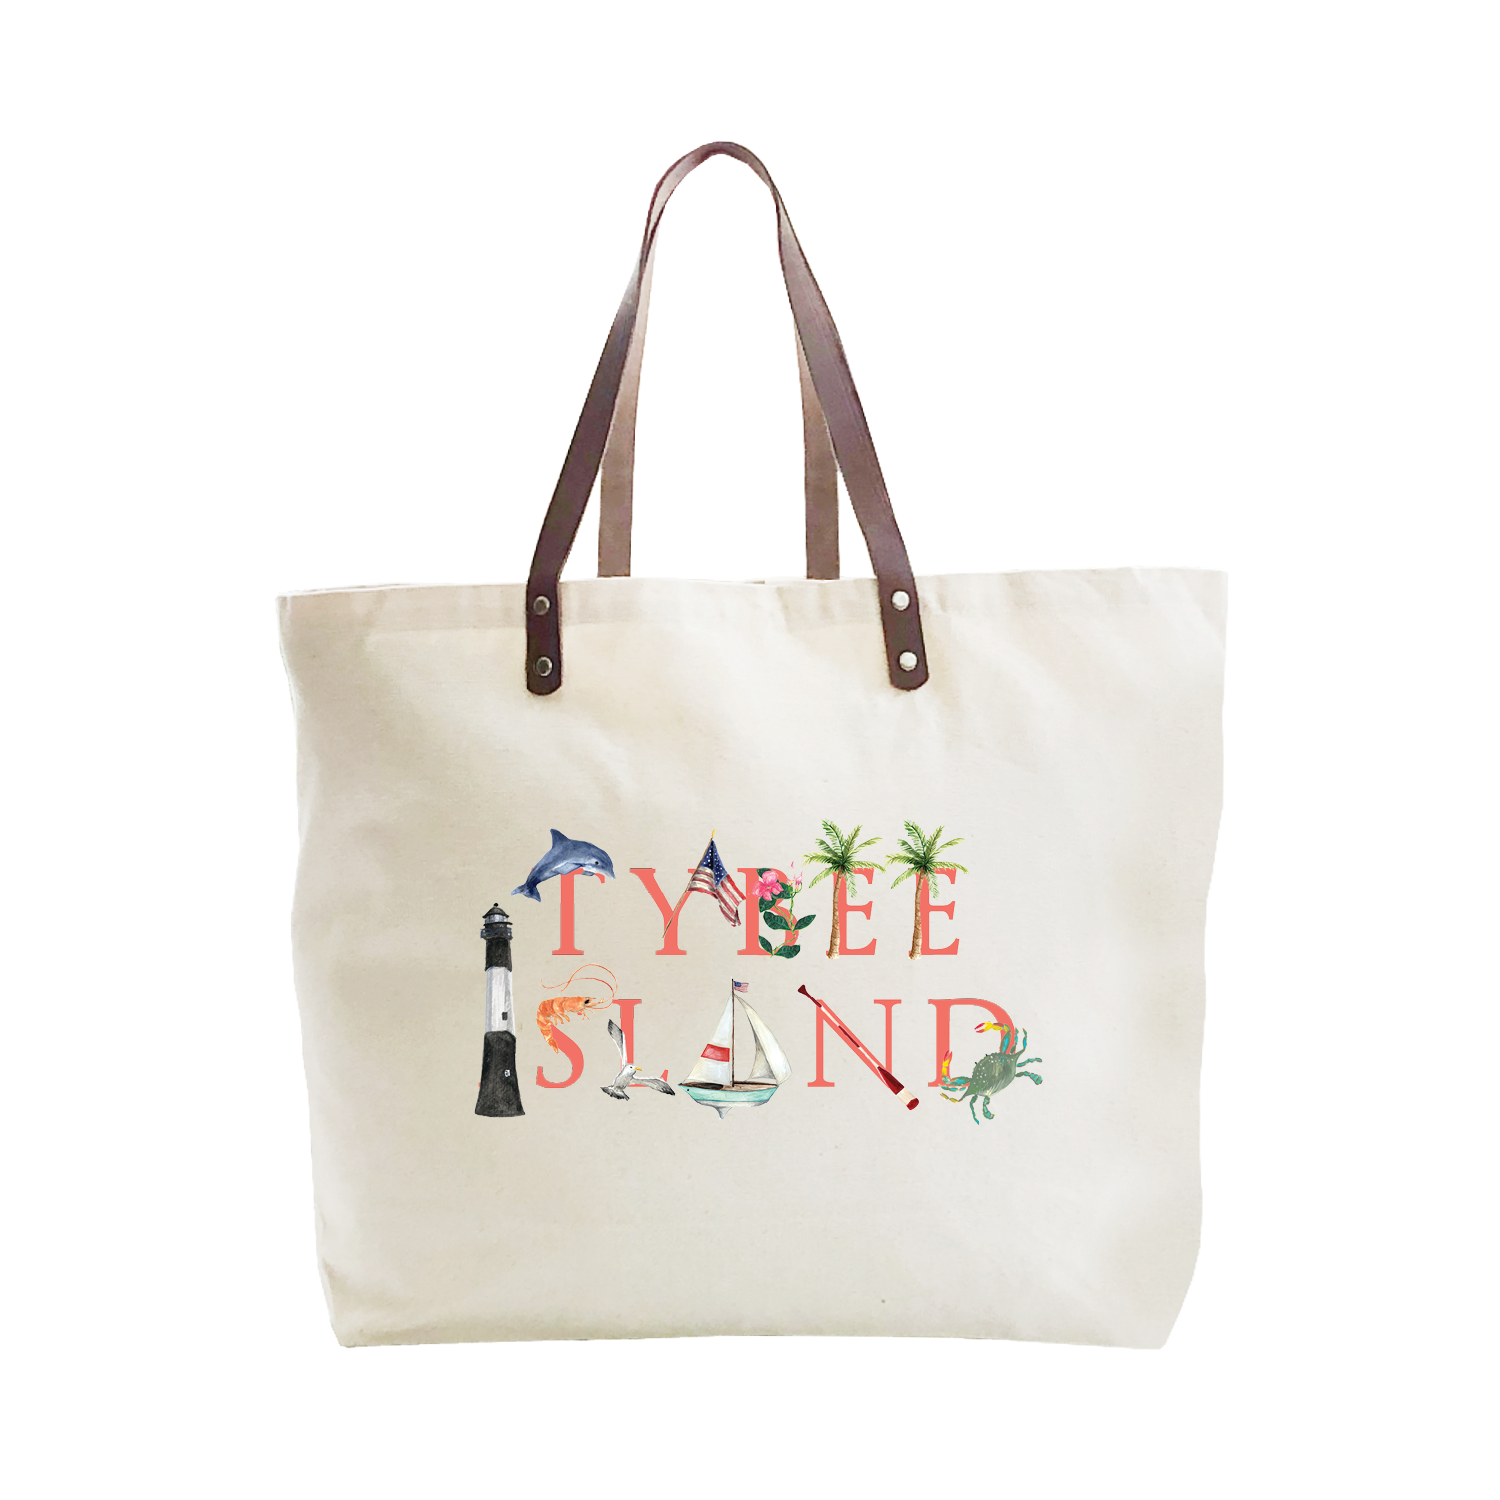 tybee large tote